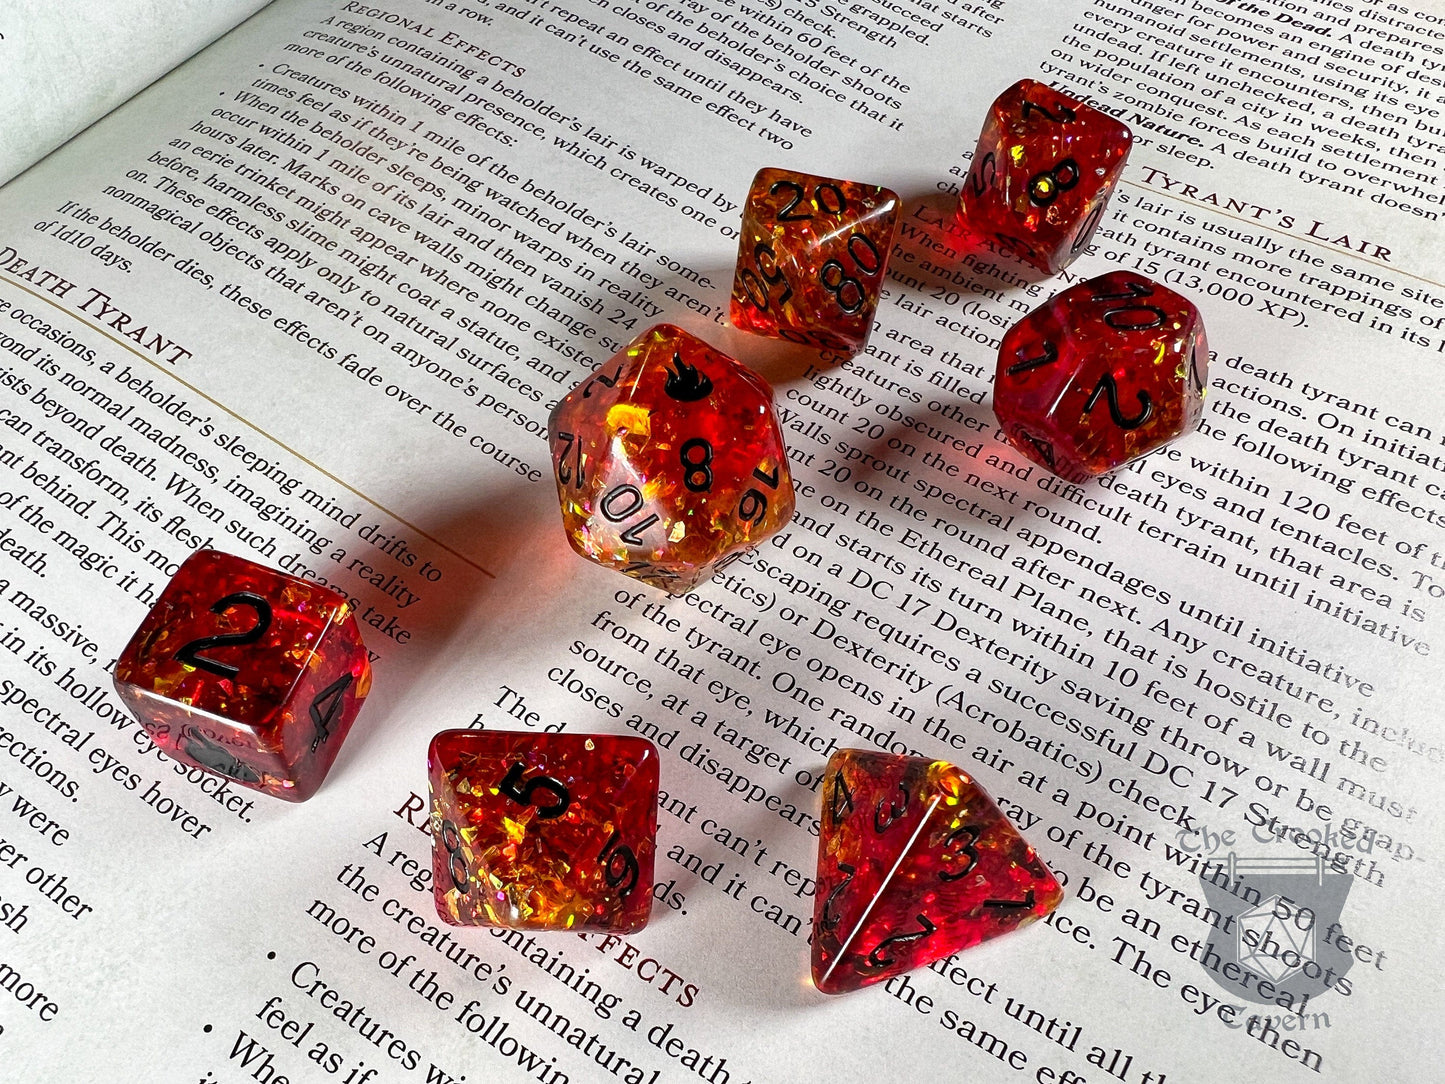 The Crooked Tavern Dice Sets Fire Light RPG Dice Set | Colorful Glitter and a Flame Engraving!